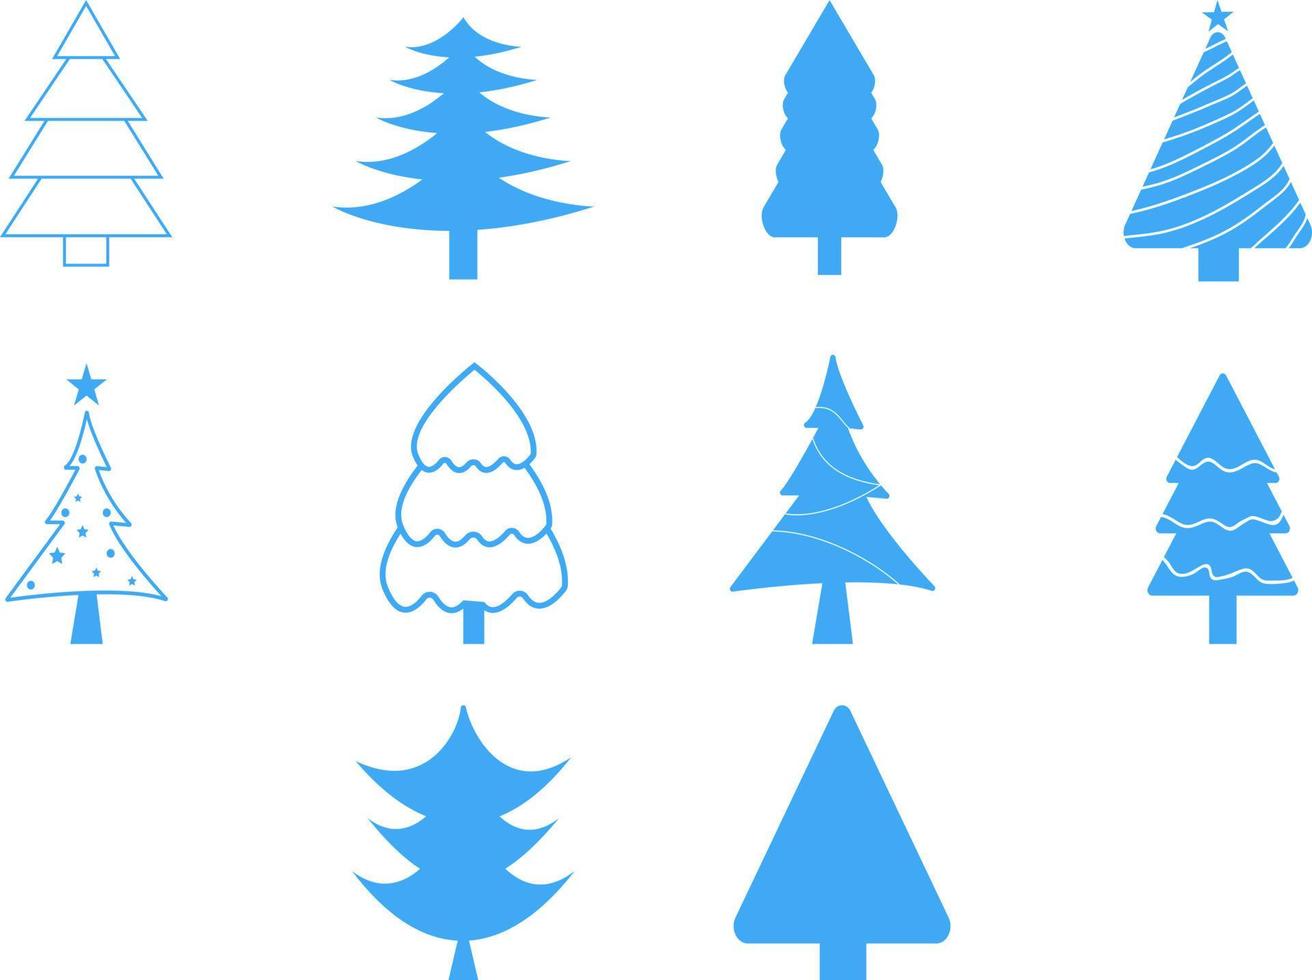 Set of Christmas trees isolated on white. Decorations for Christmas. Vector illustration.